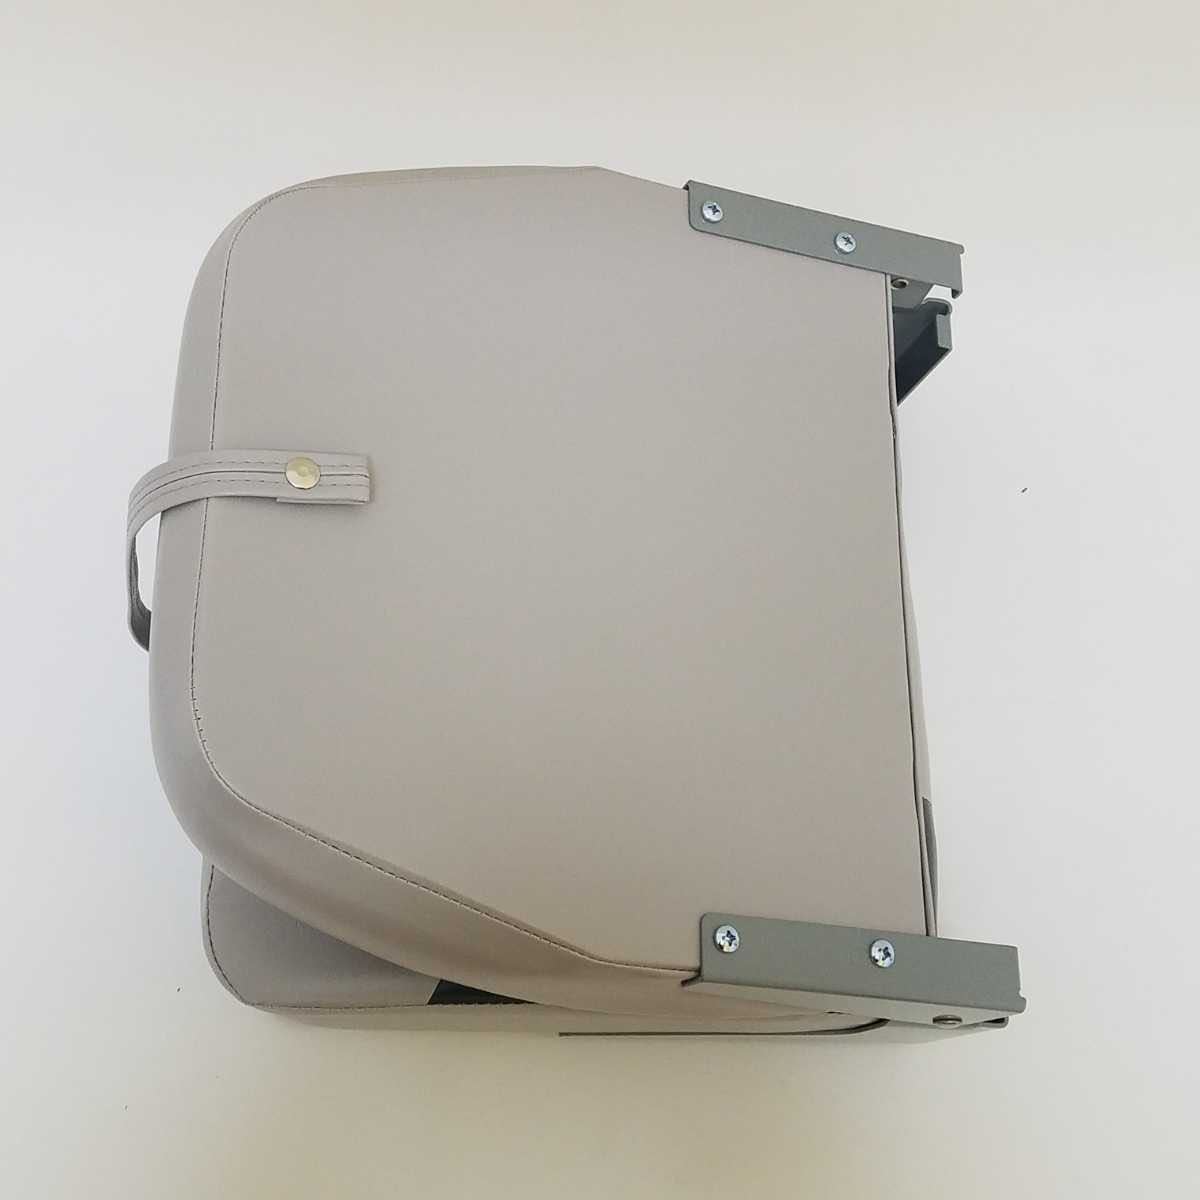 * free shipping * gray two-tone chair heavy equipment tractor boat boat etc.. chair seat bucket auto Ace marine 